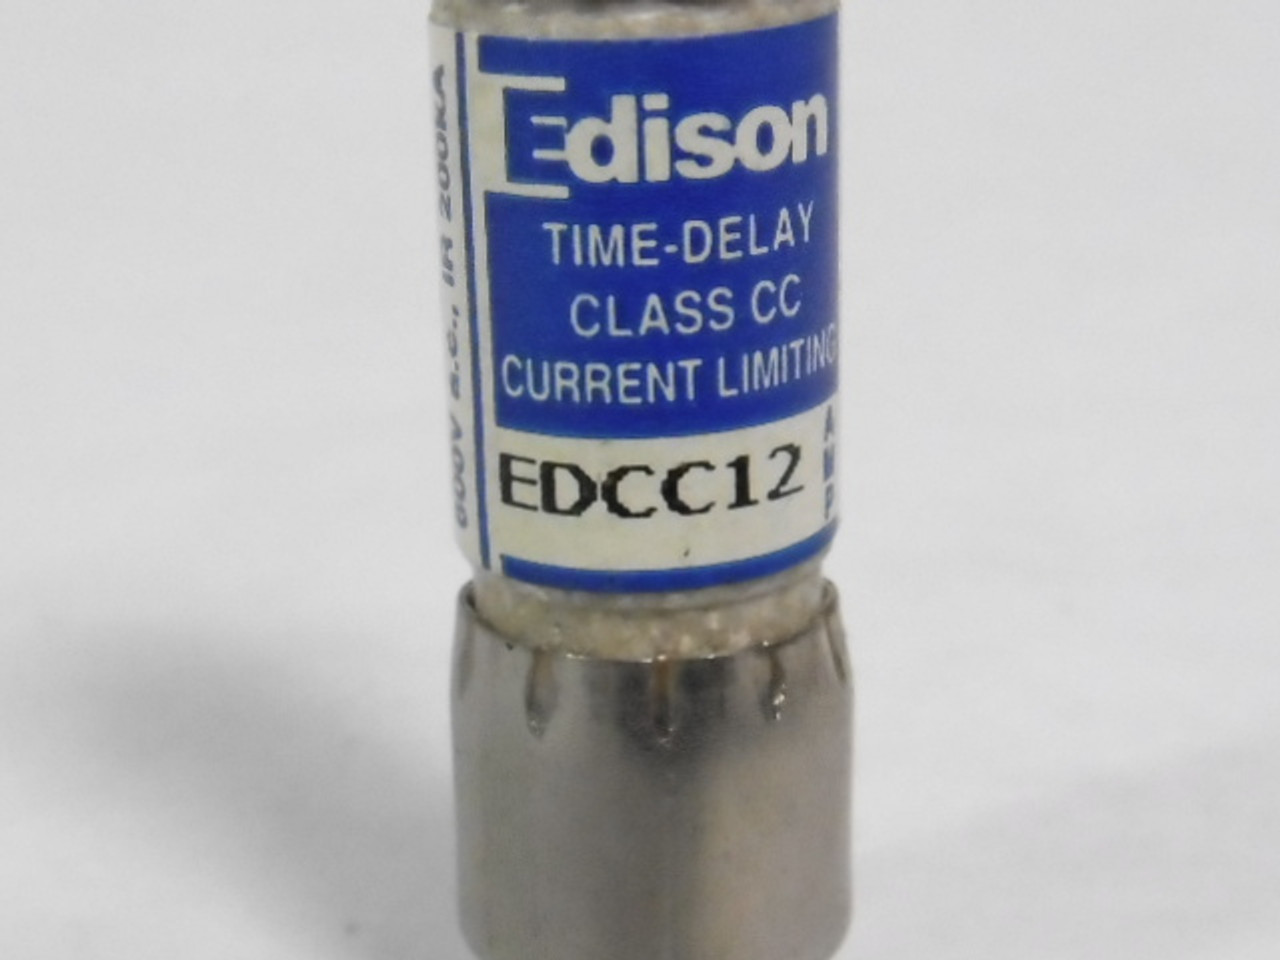 Edison EDCC12 Time Delay Current Limiting Fuse 12A 600V USED